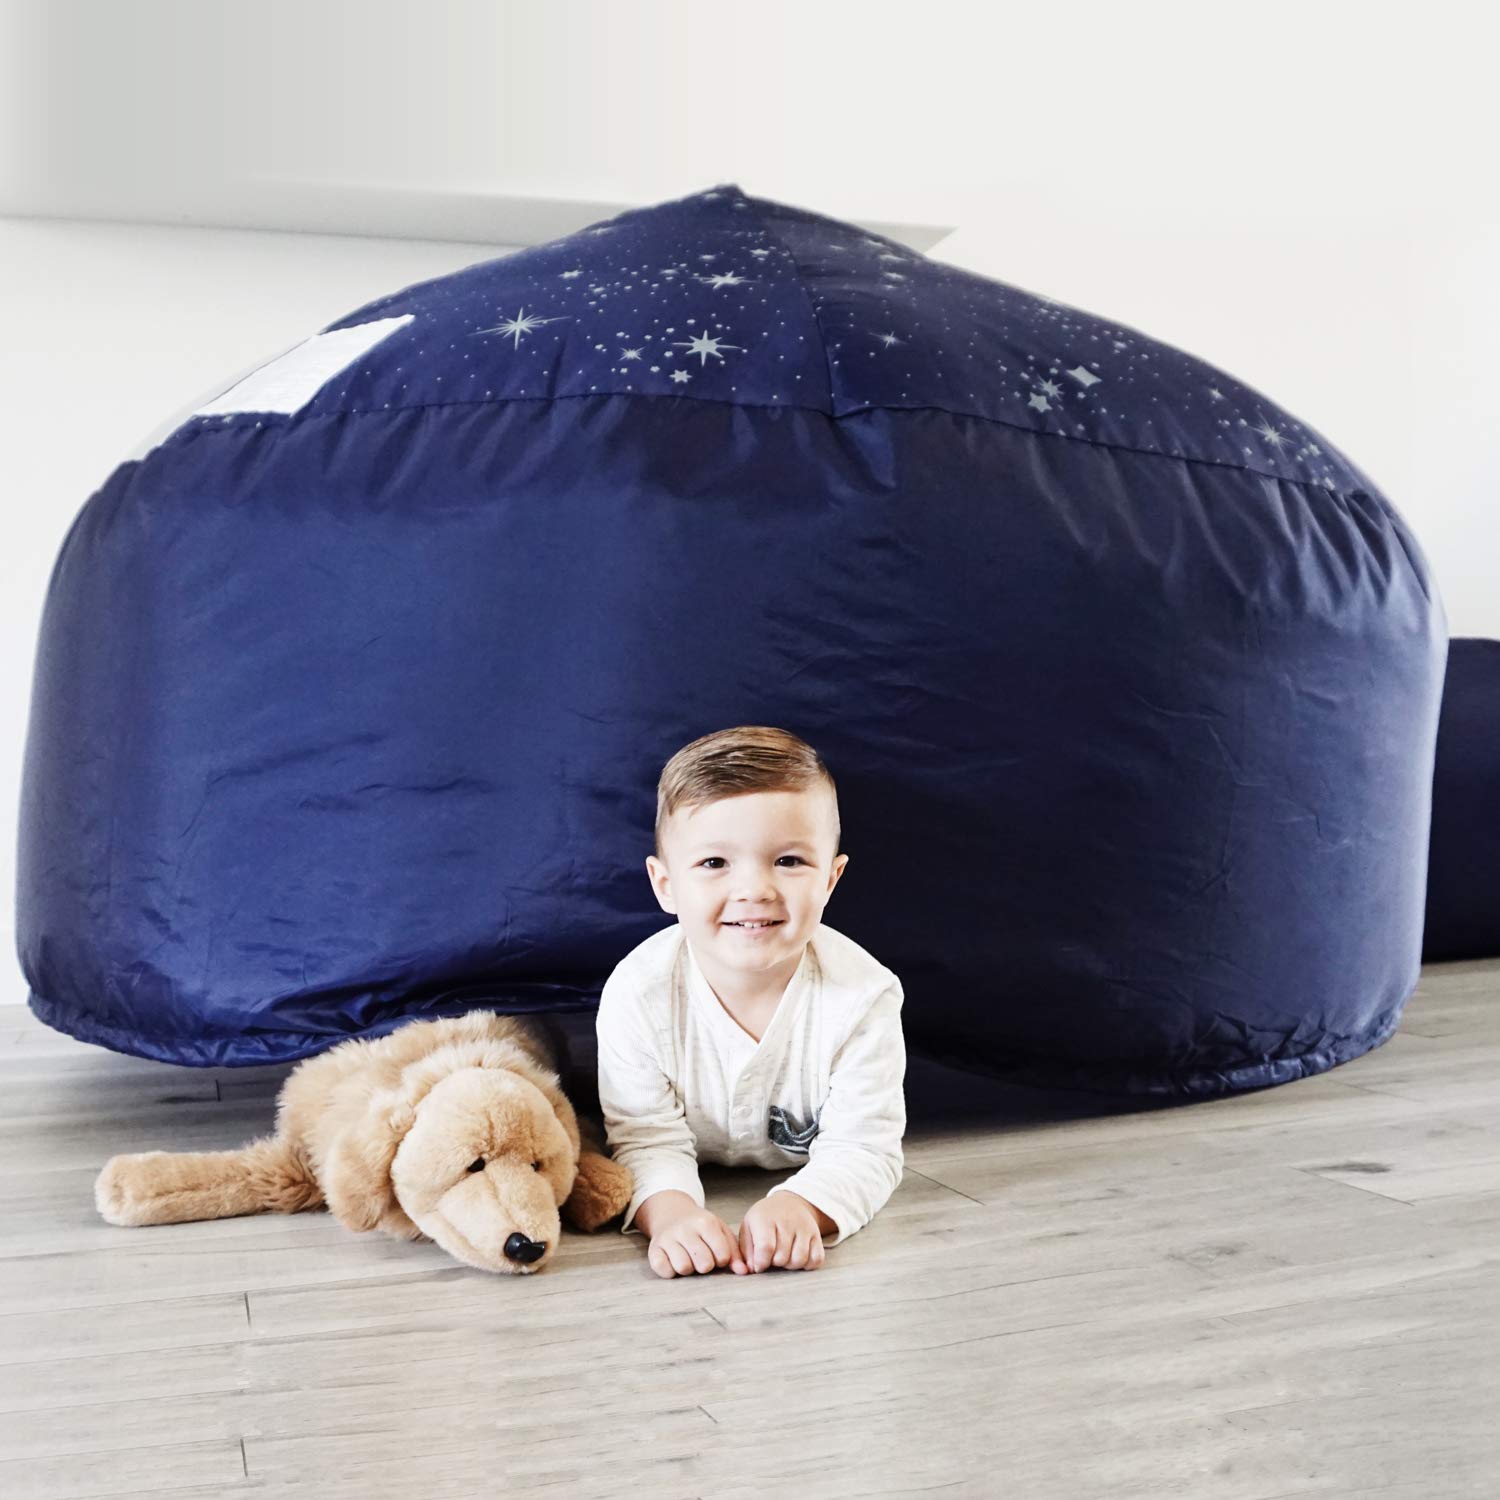 The Original AirFort Build A Fort in 30 Seconds, Inflatable Fort for Kids (Starry Night)